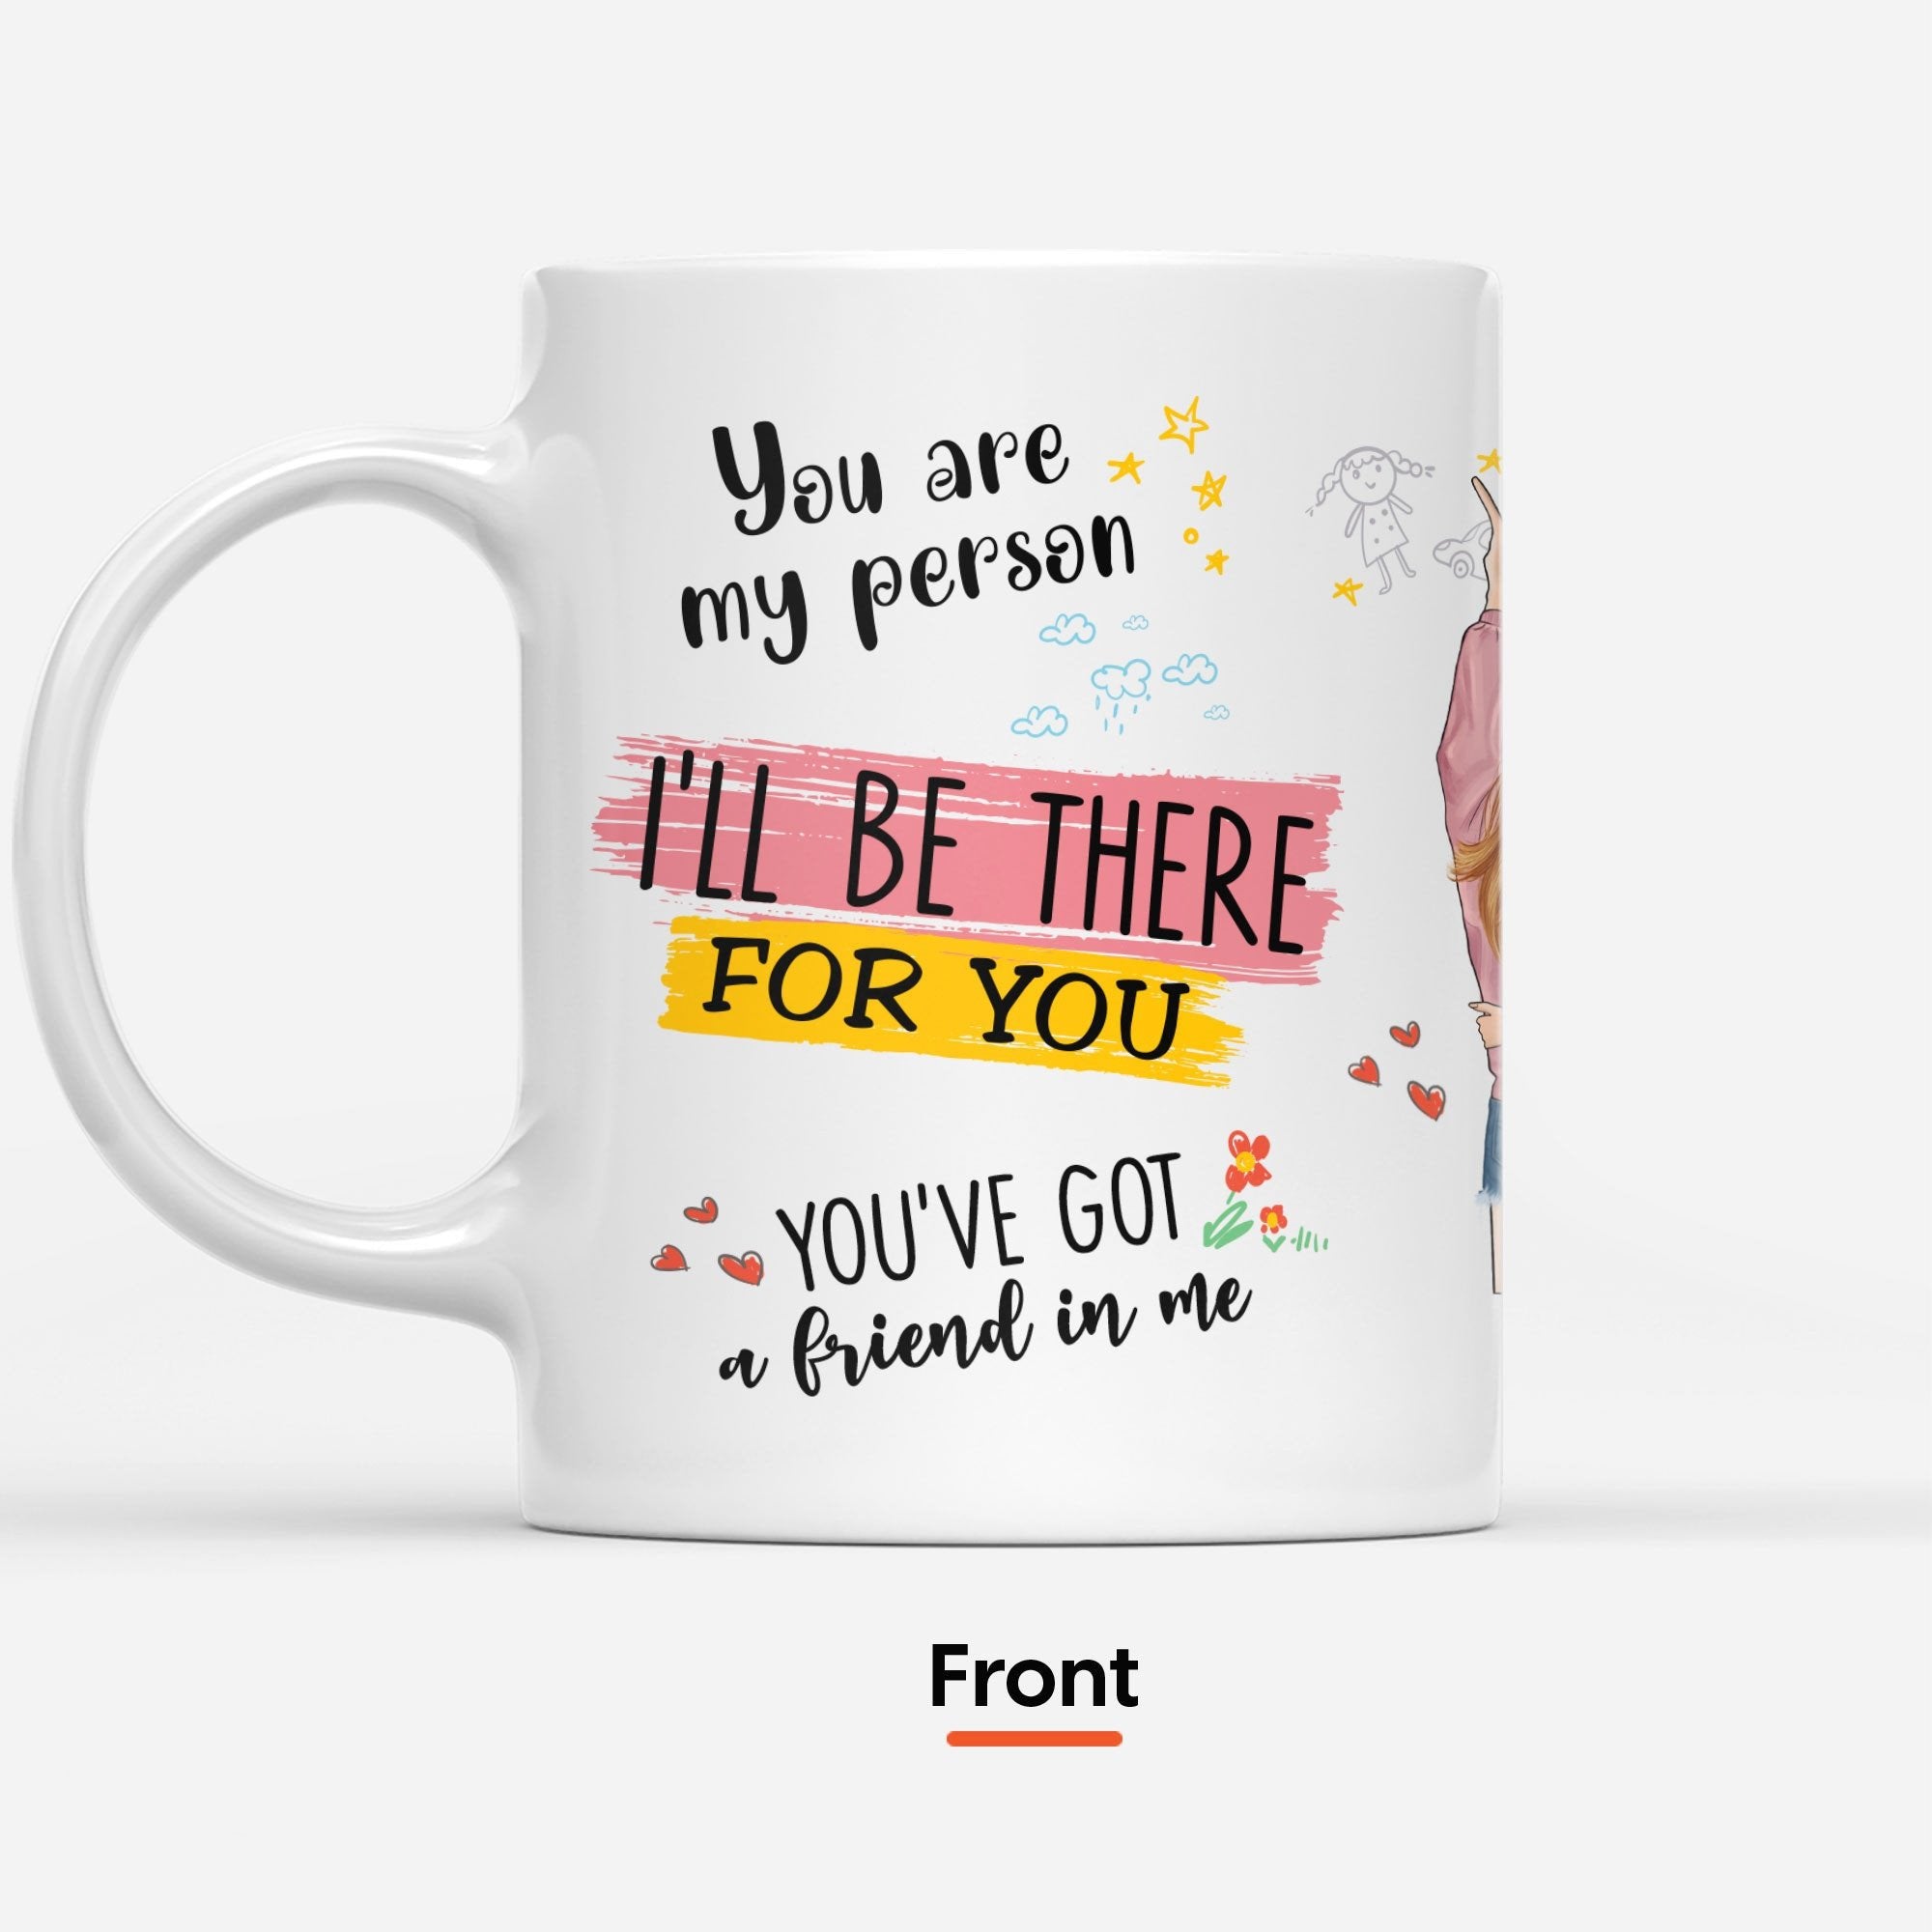 You've Got A Friend In Me - Personalized Mug - Christmas Gift For 3 Friends - Christmas Girls